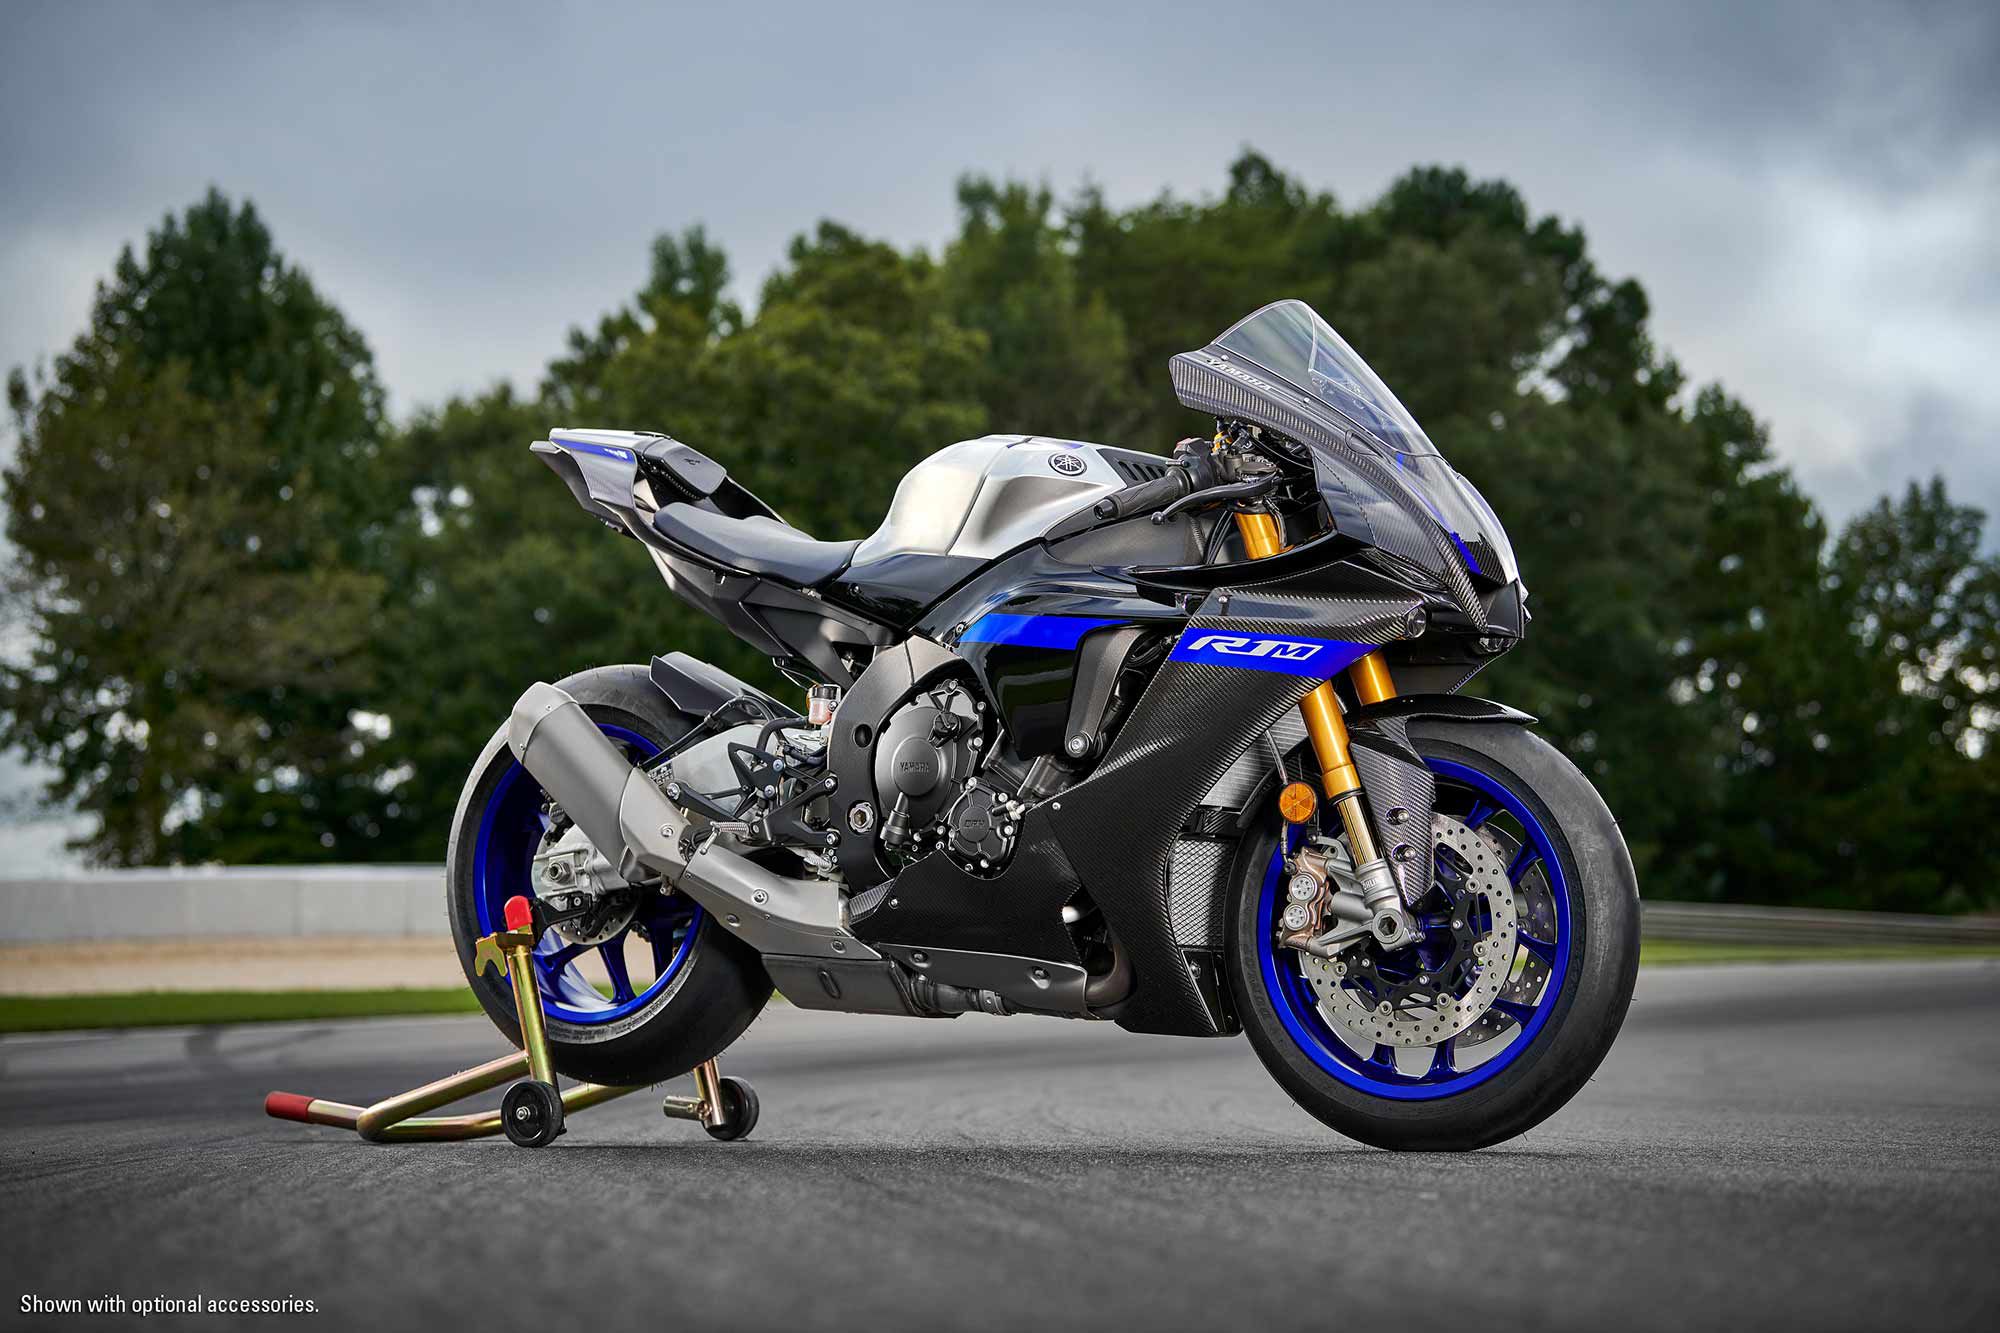 The Yamaha YZF-R1M is another well-established model we’re always pleased to ride.